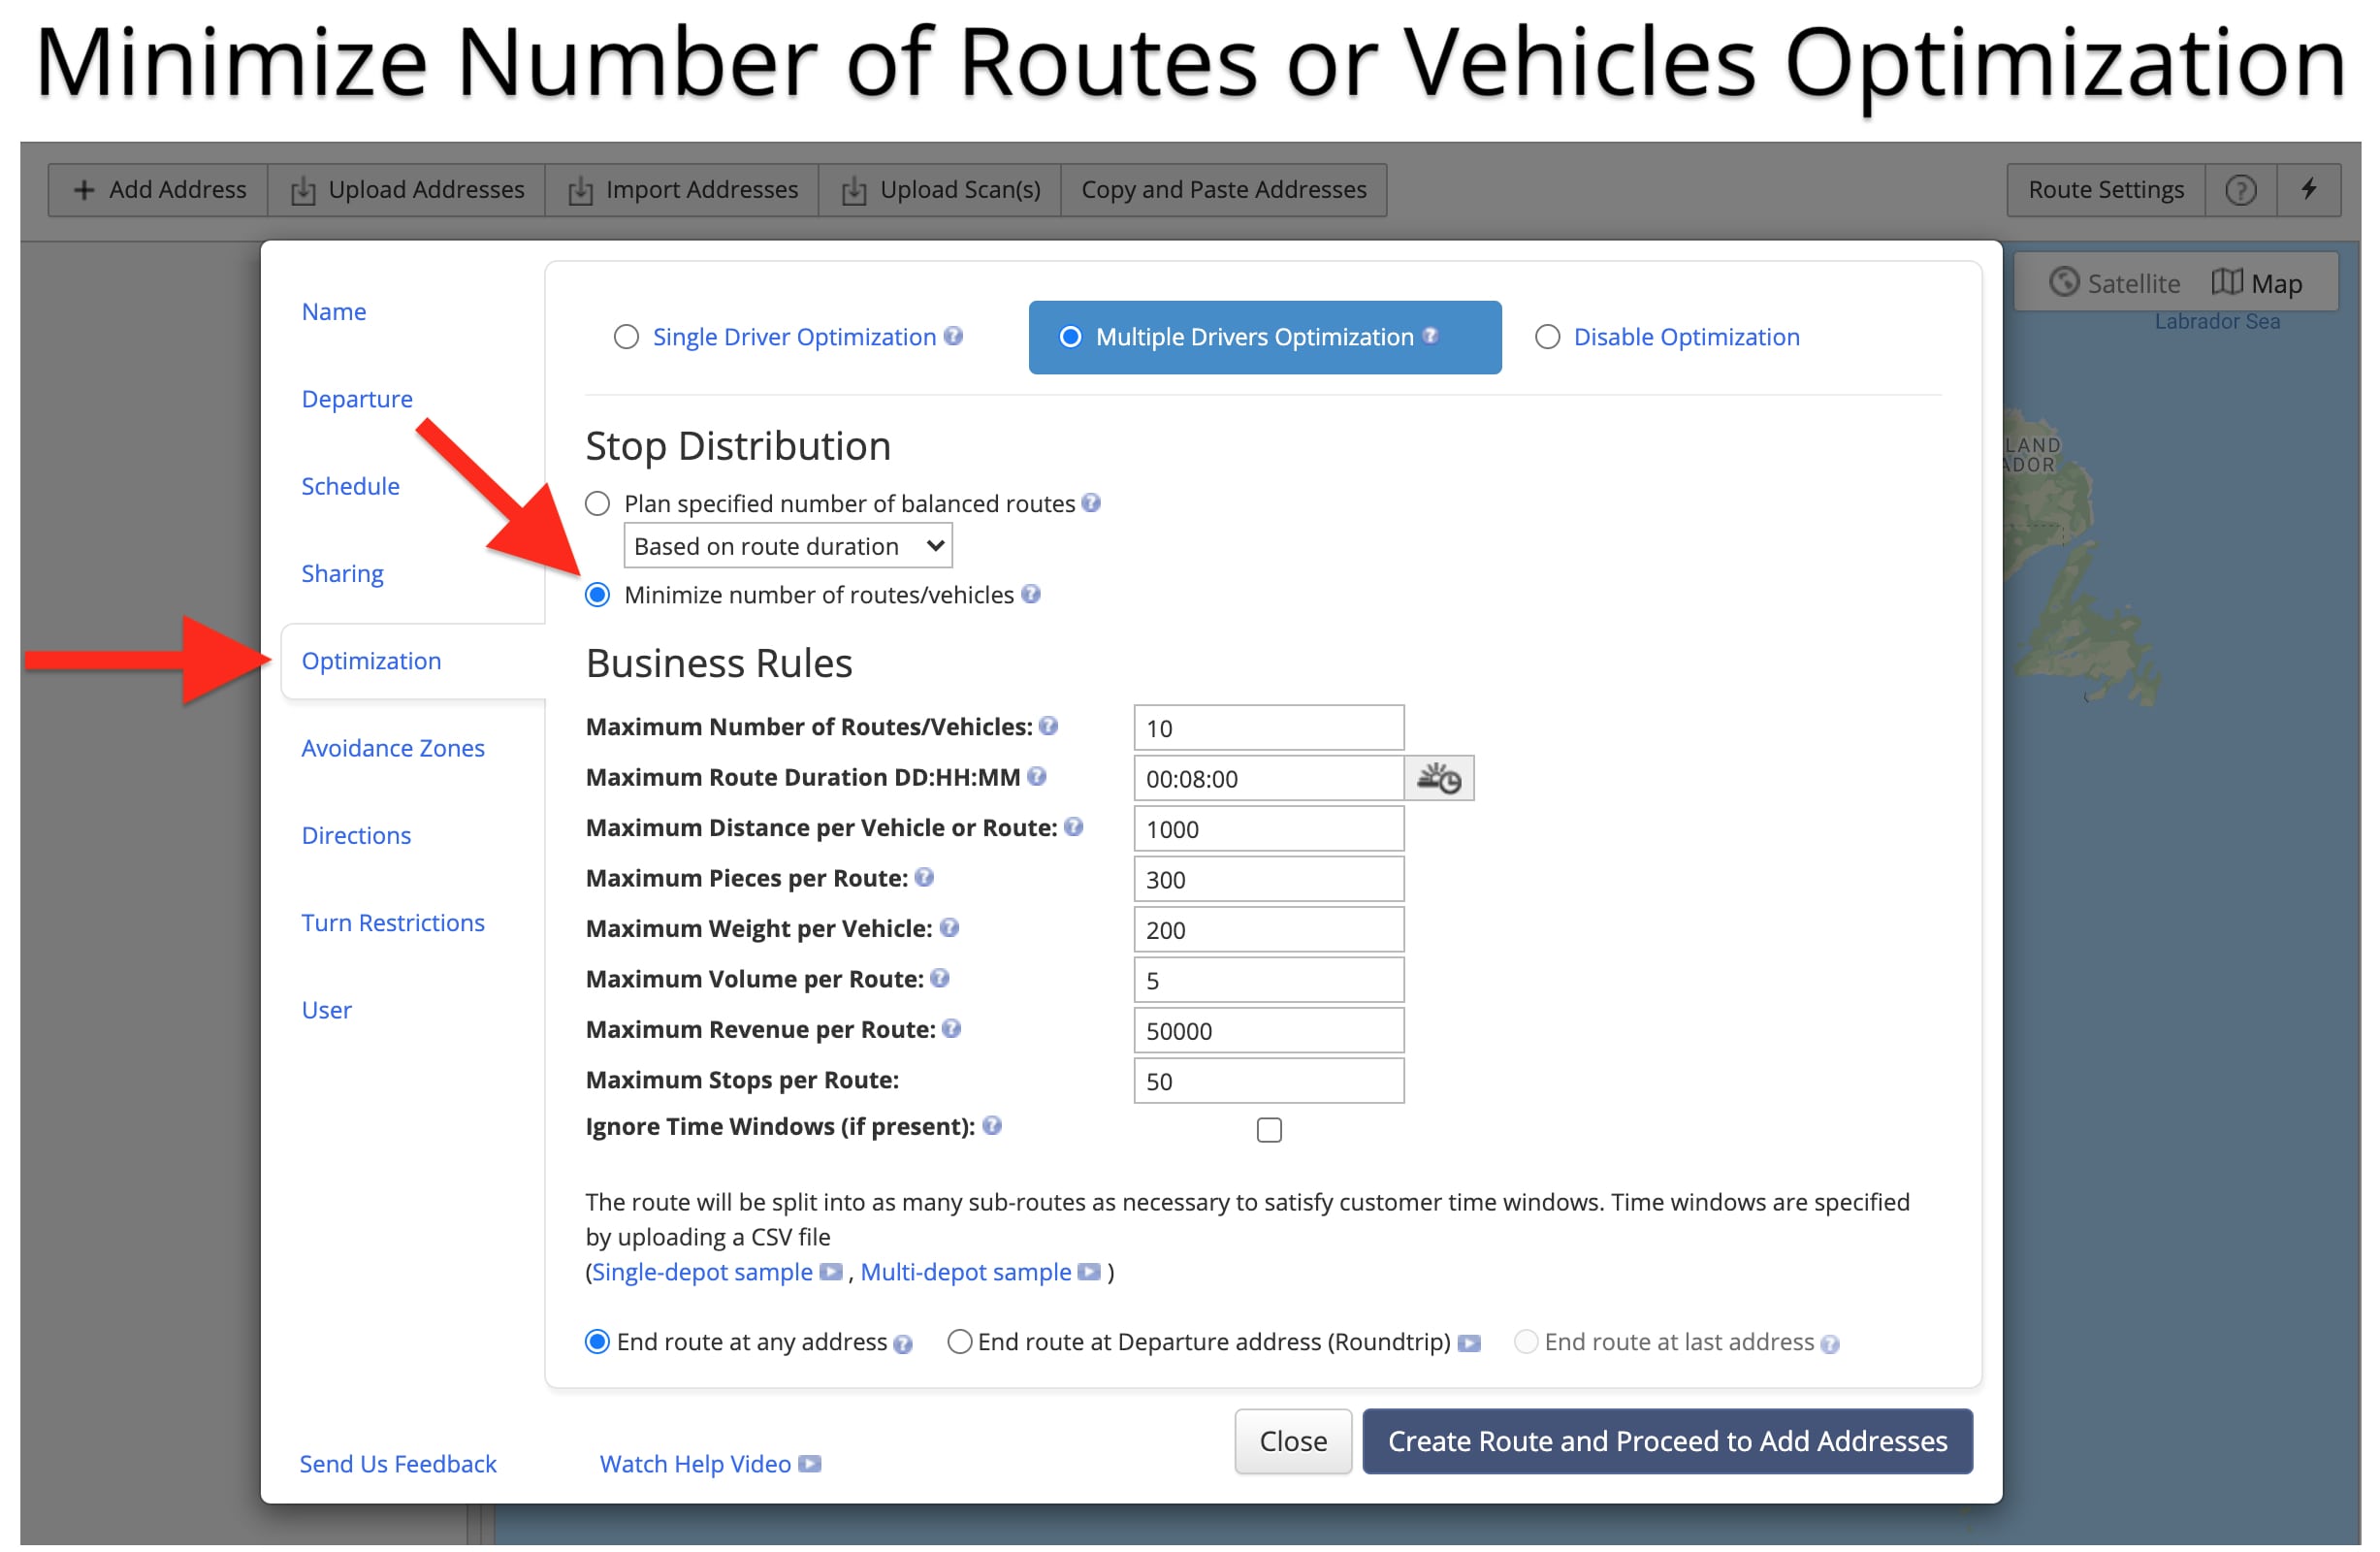 Minimize the number of routes or vehicles optimization plans the most optimal number of routes.